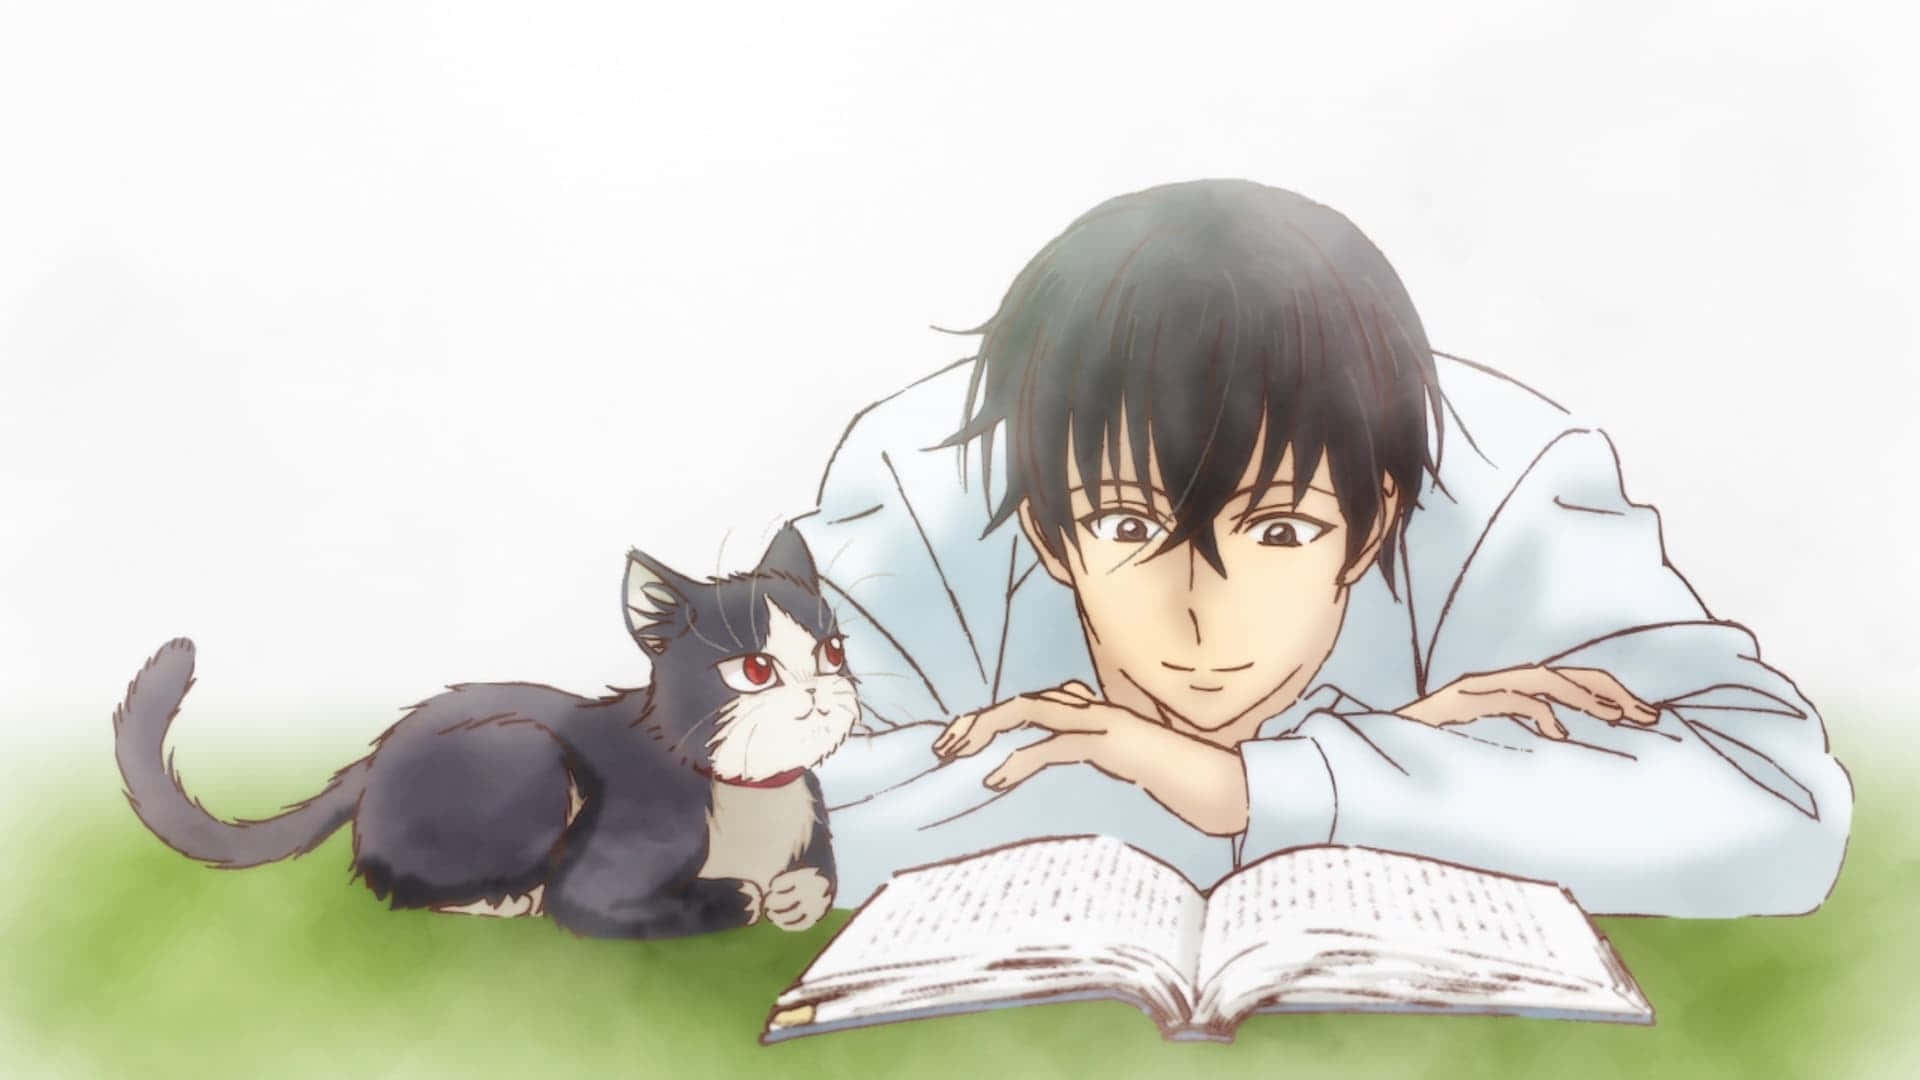 The Cozy Bonding Moment Of A Boy And His Cat Wallpaper